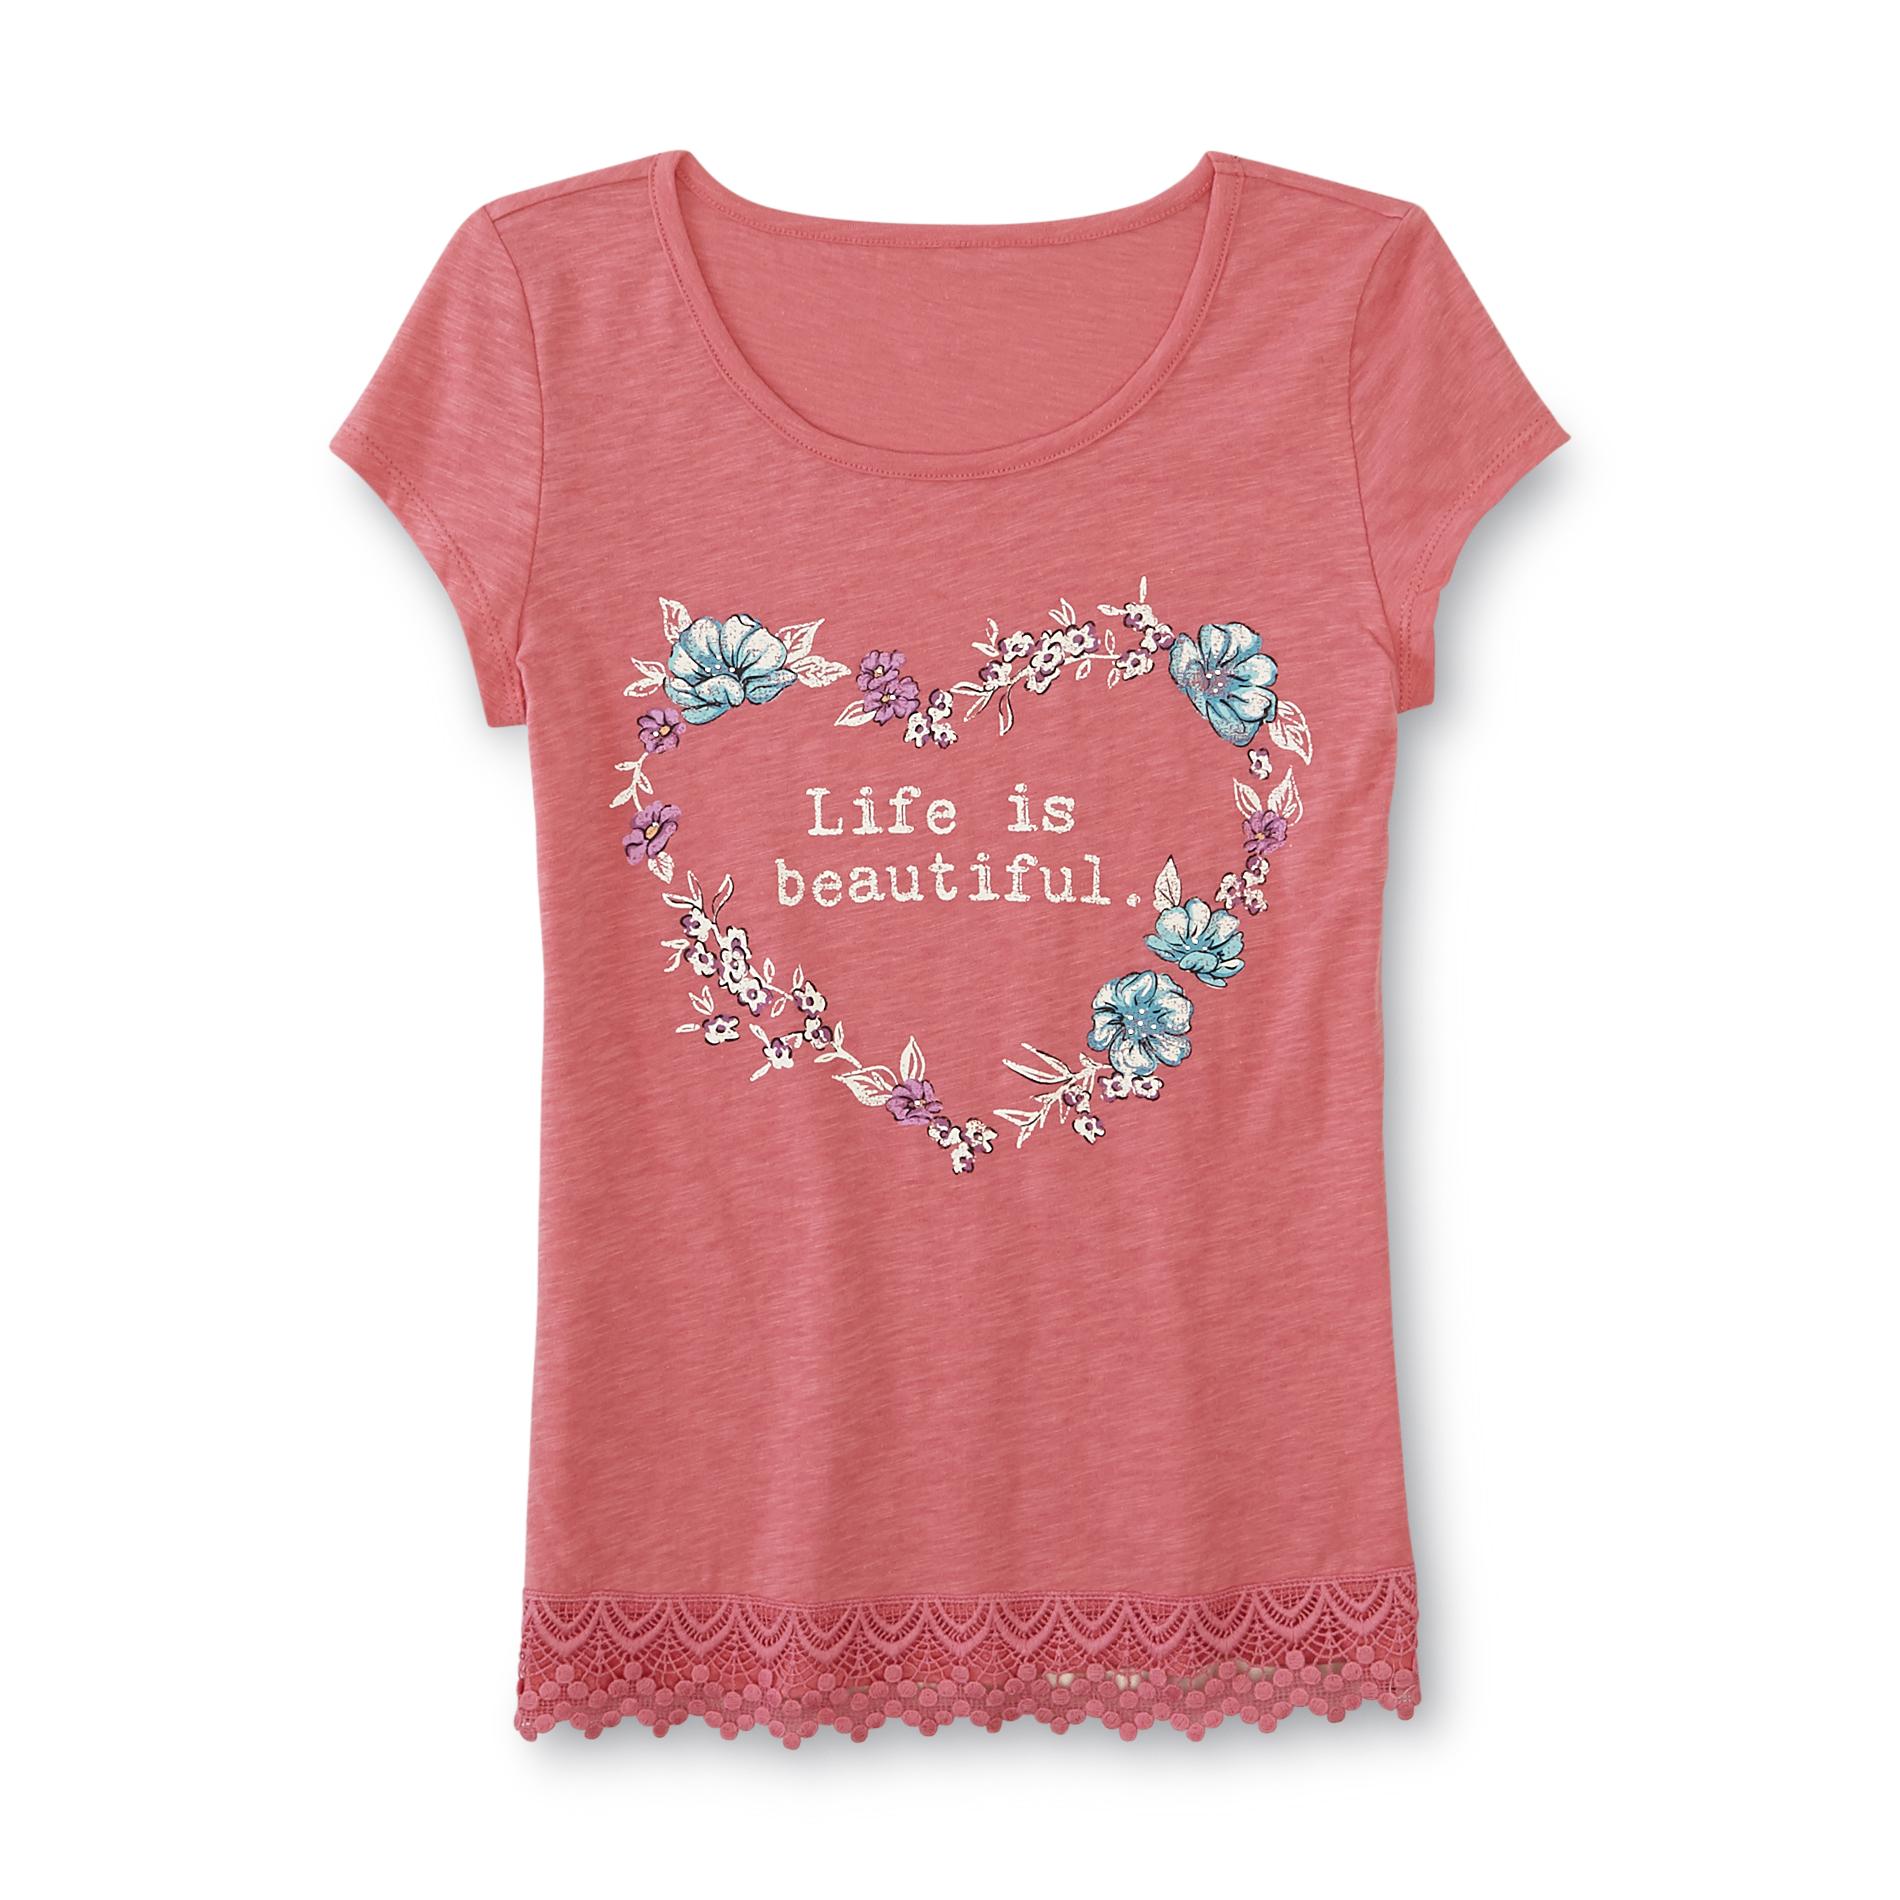 Canyon River Blues Girl's Graphic T-Shirt - Life Is Beautiful